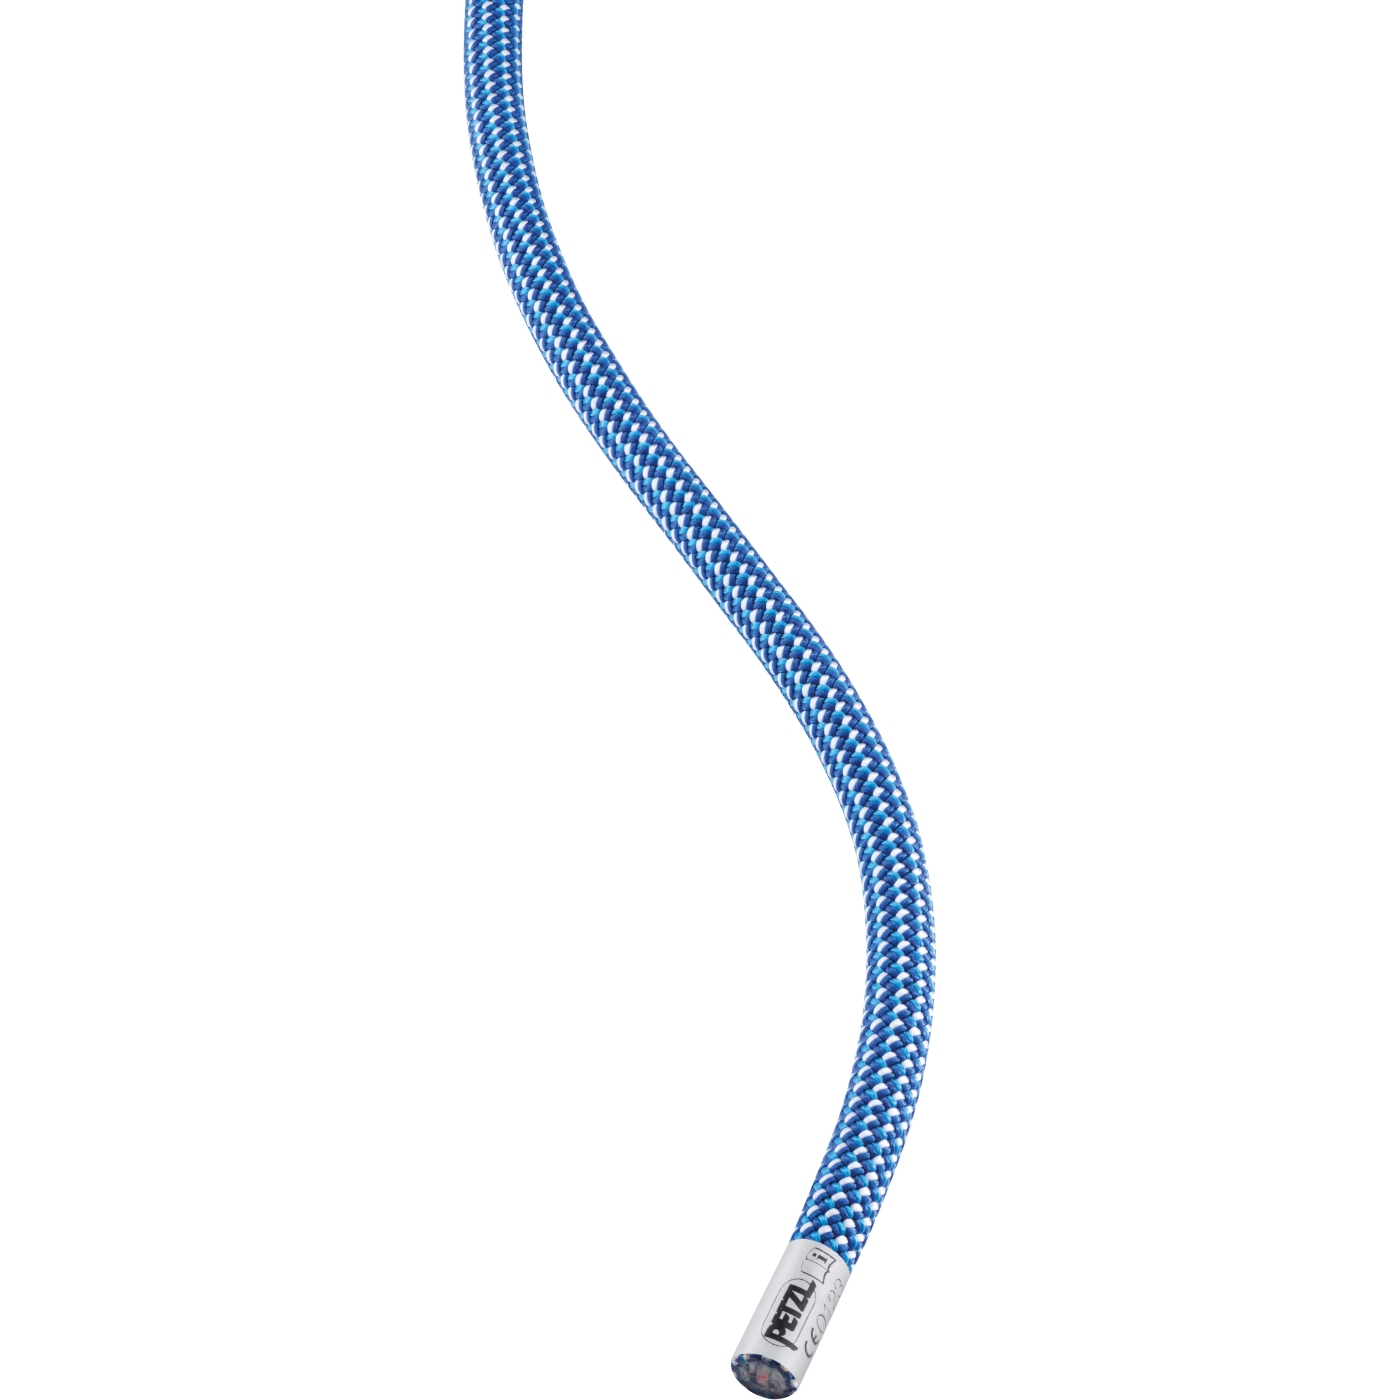 Picture of Petzl Contact 9.8mm Rope - 70m - blue